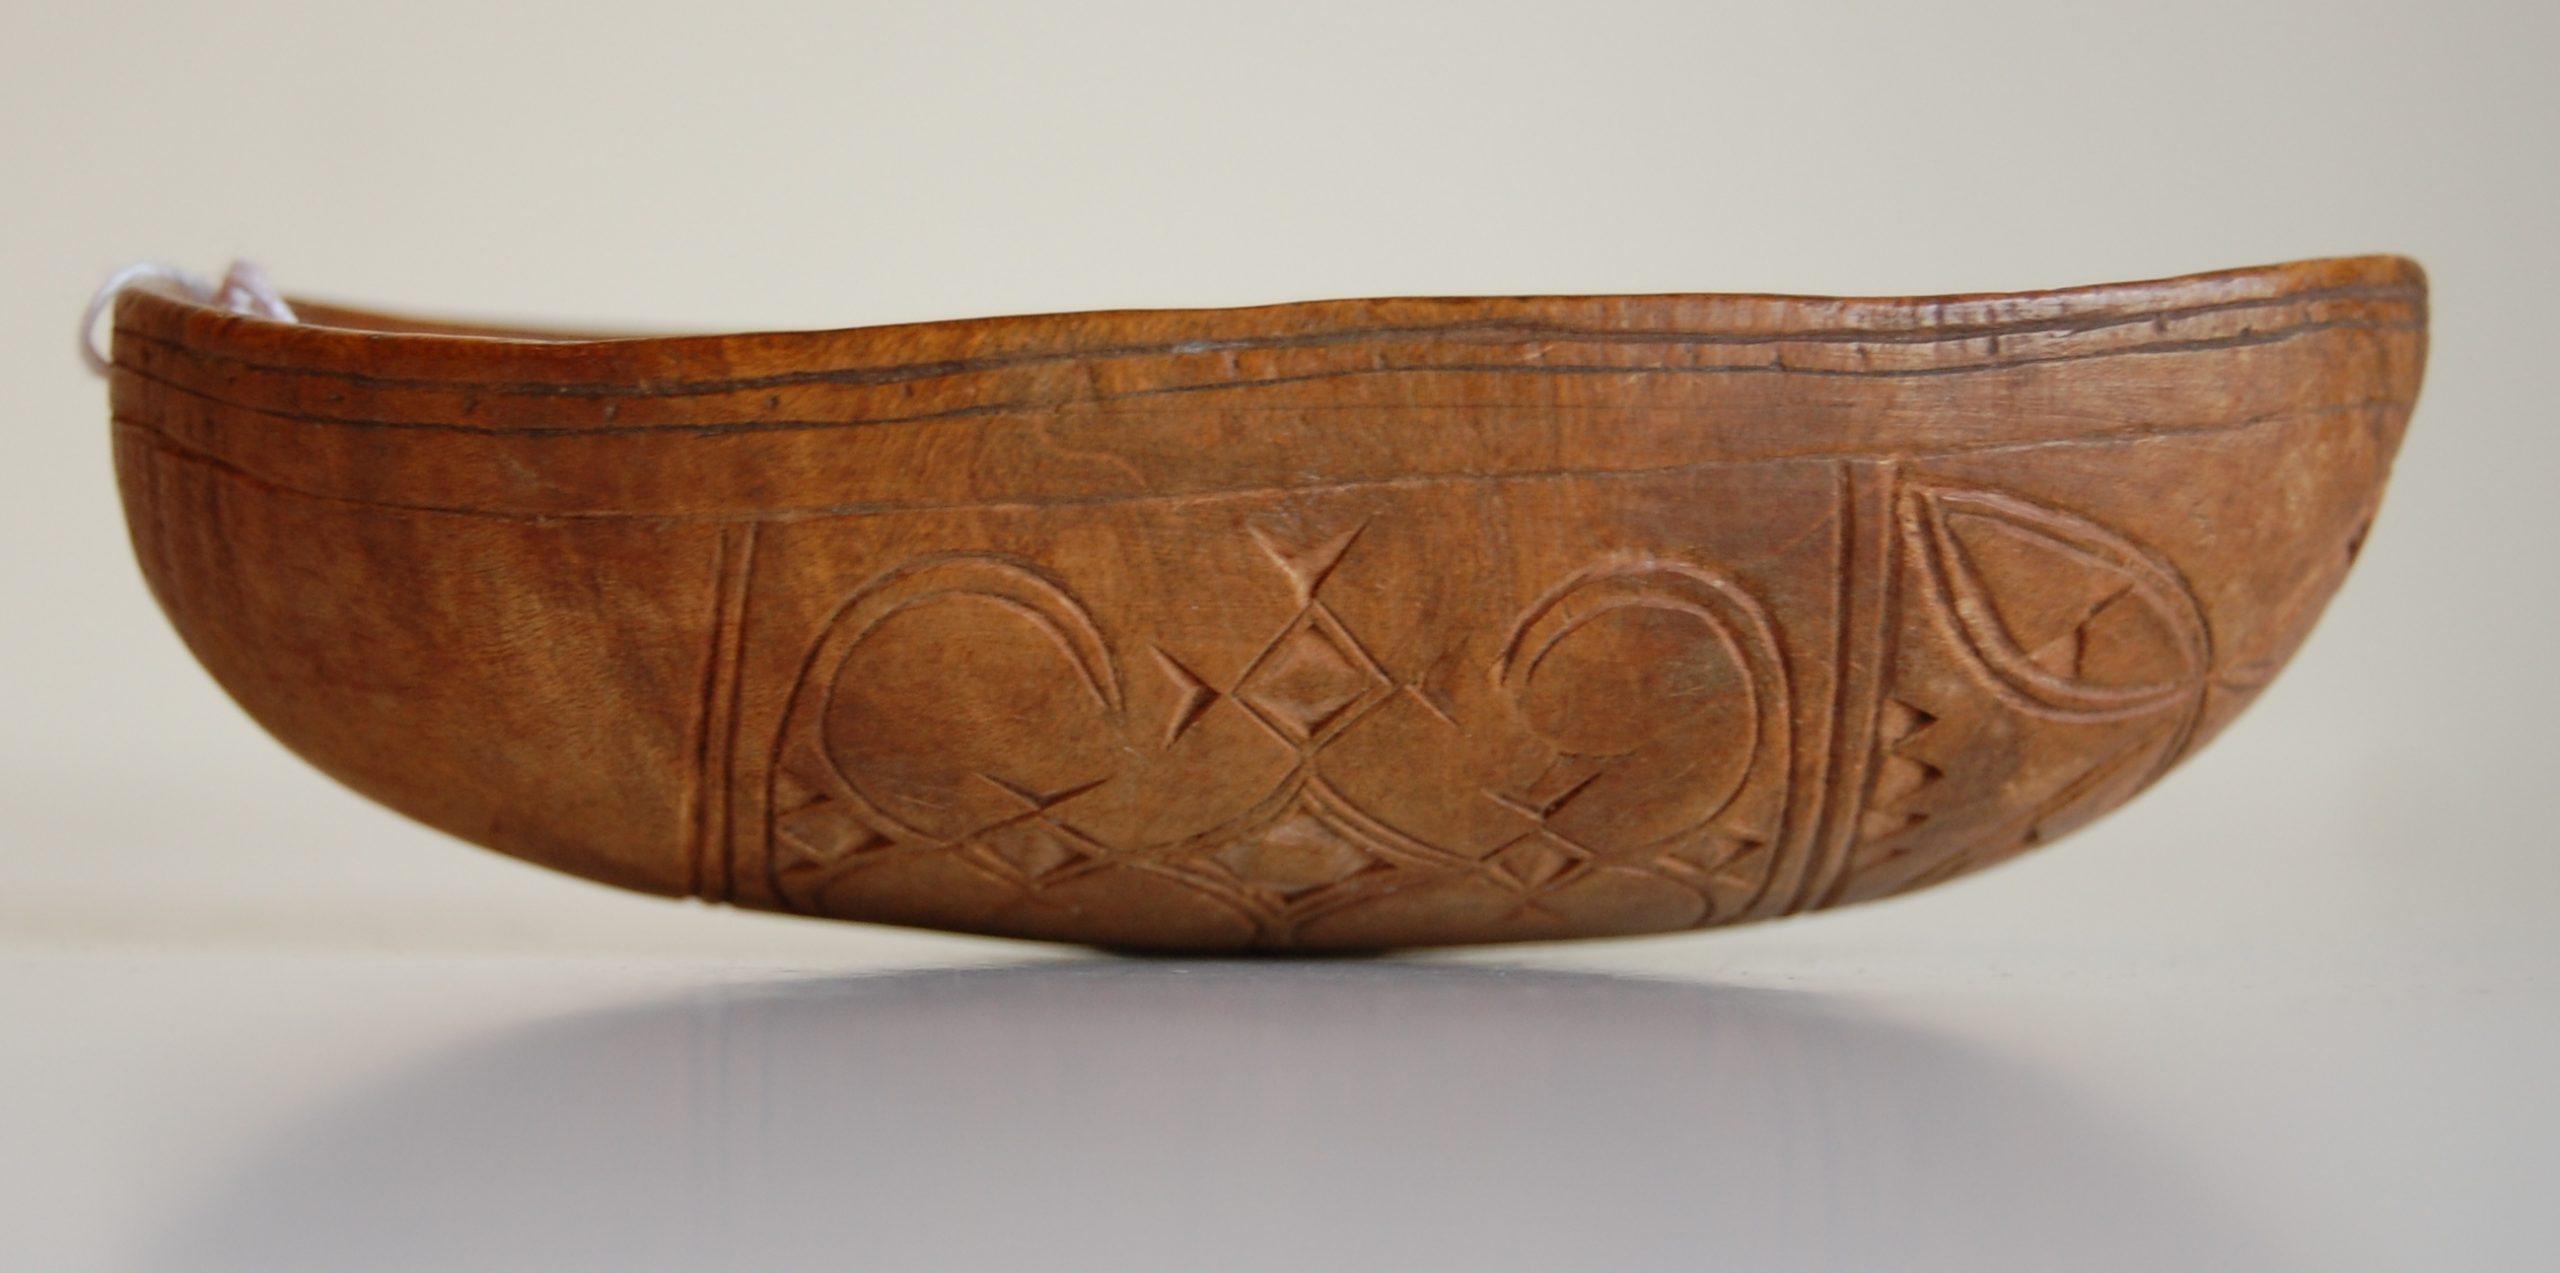 Drinking Cup made of maple or birch burl, date unknown.  The cup was used by a local tribe. Donated by Josephine Brazier in 1943.